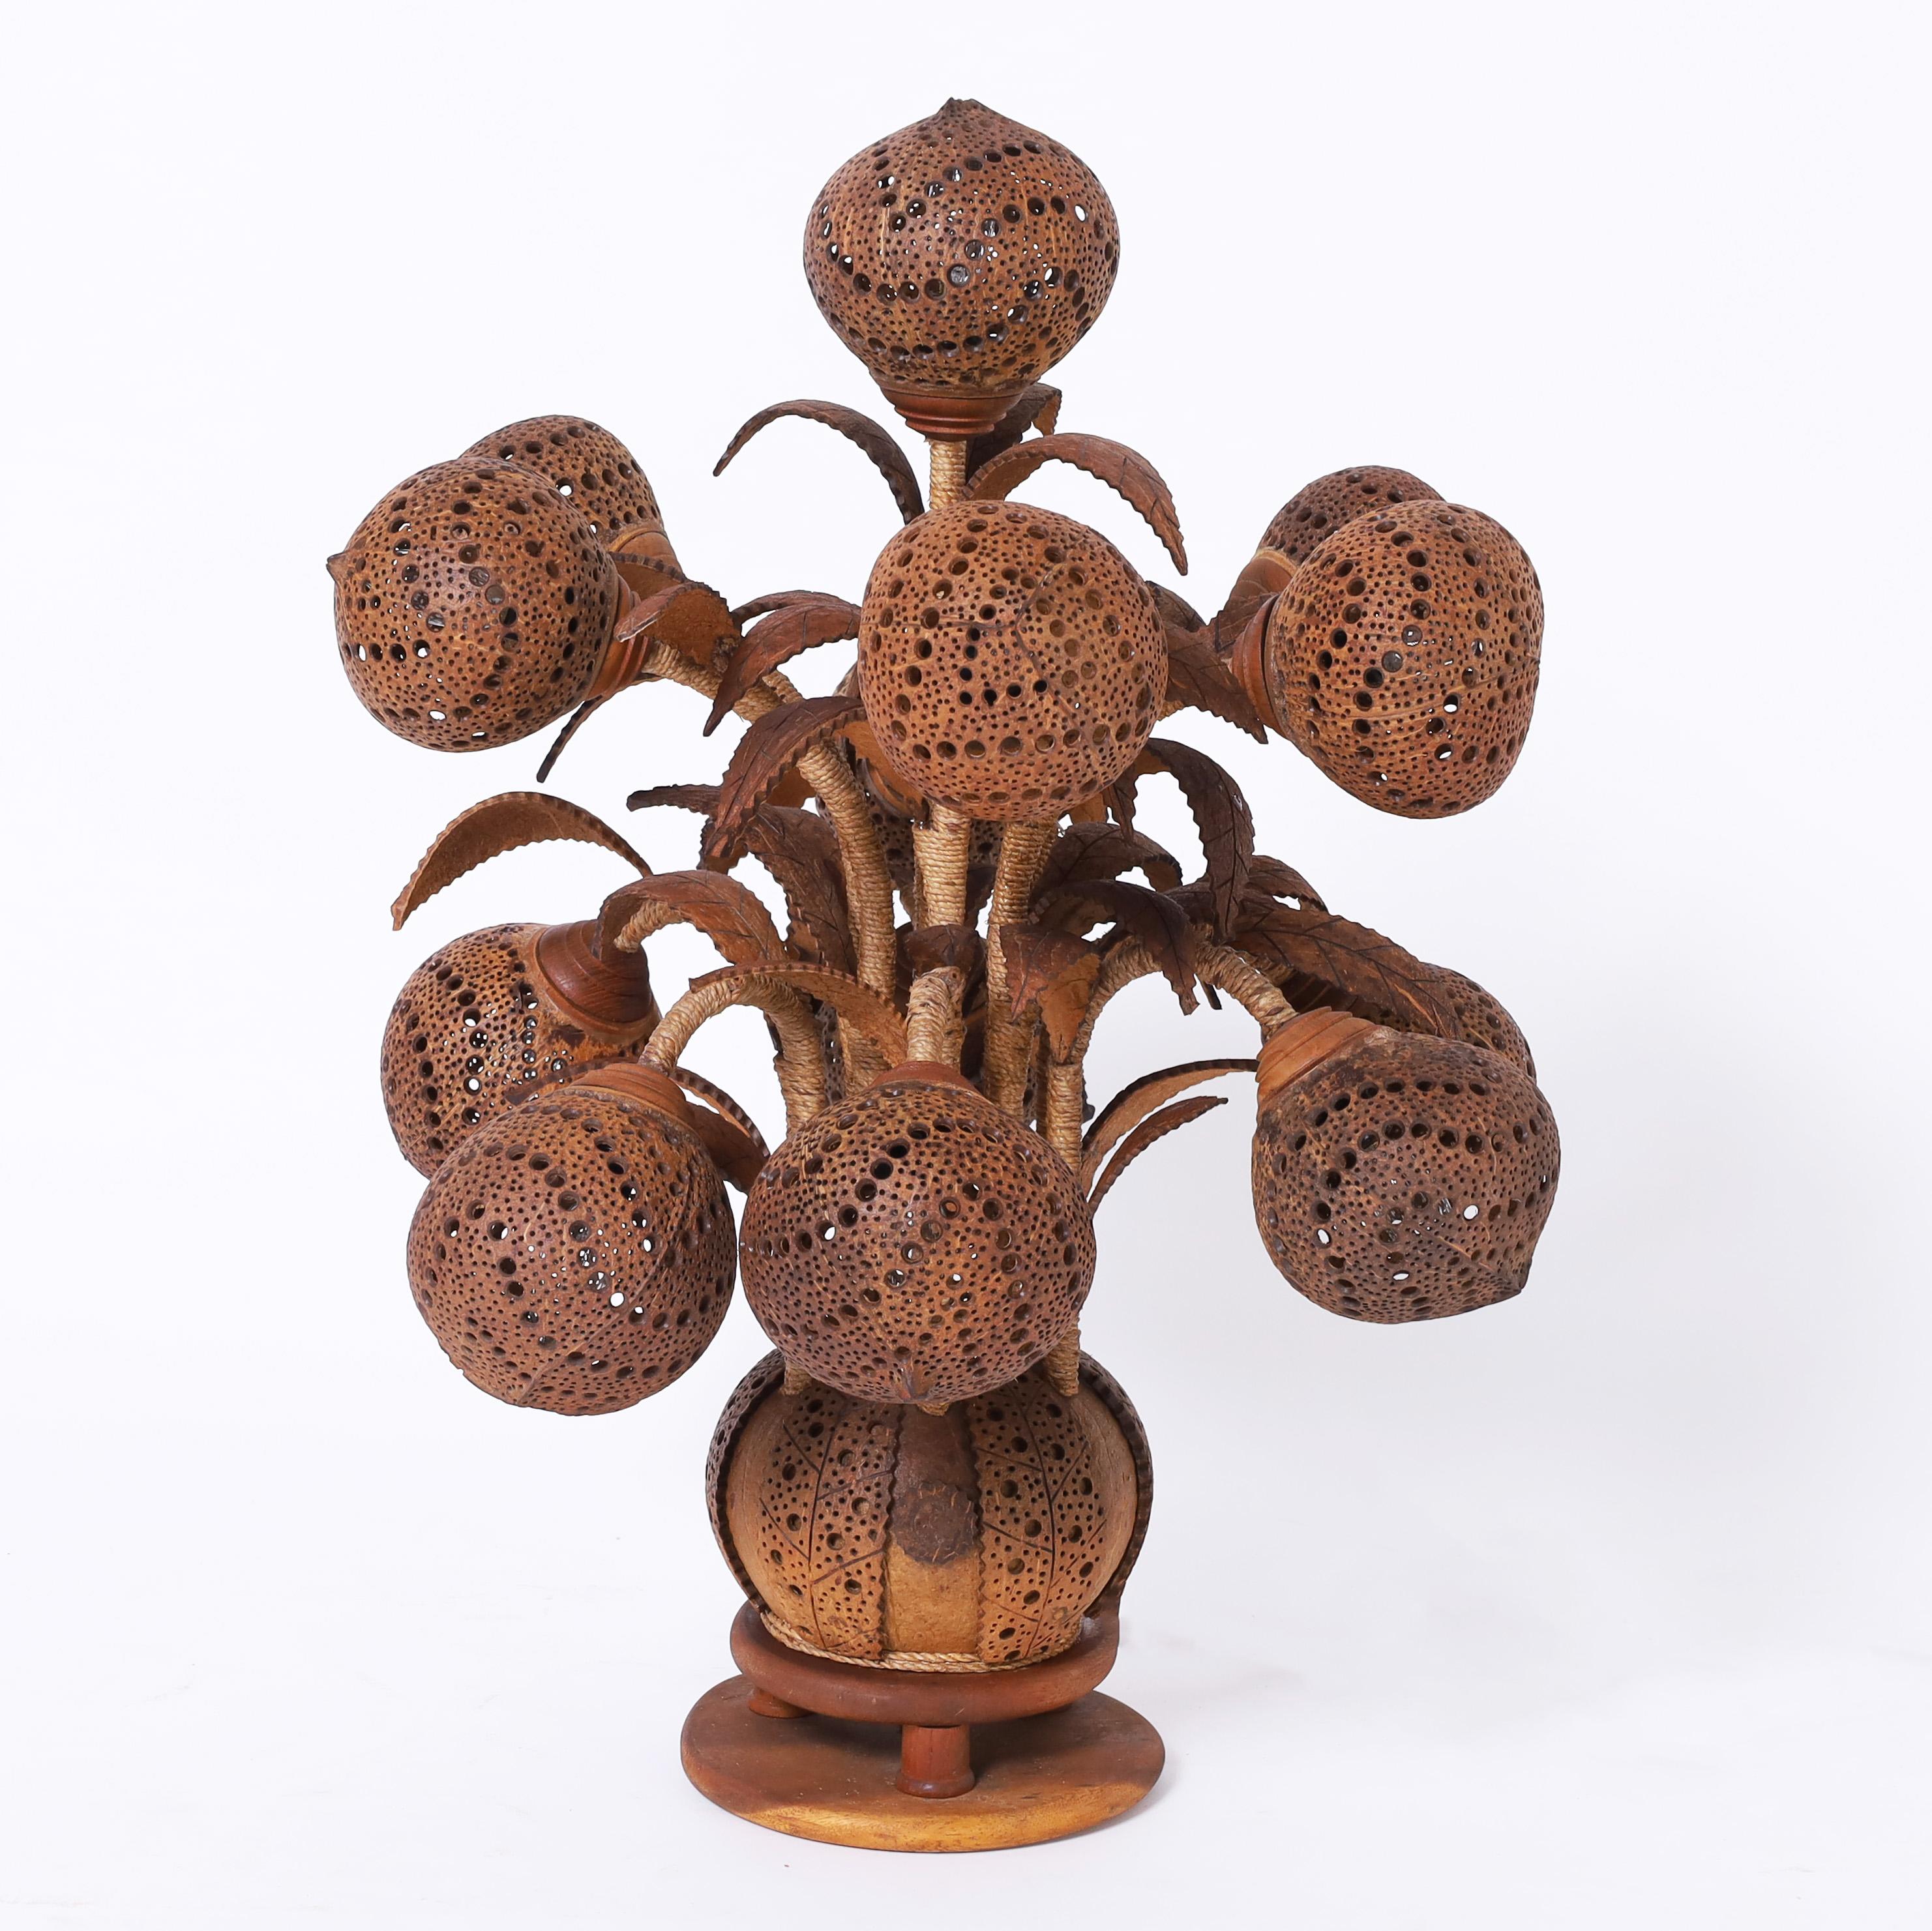 Rare and unusual handmade table lamp featuring thirteen carved and perforated coconut shells as shades, carved coconut leaves, hand wrapped string stems and a coconut base on a mahogany platform. 